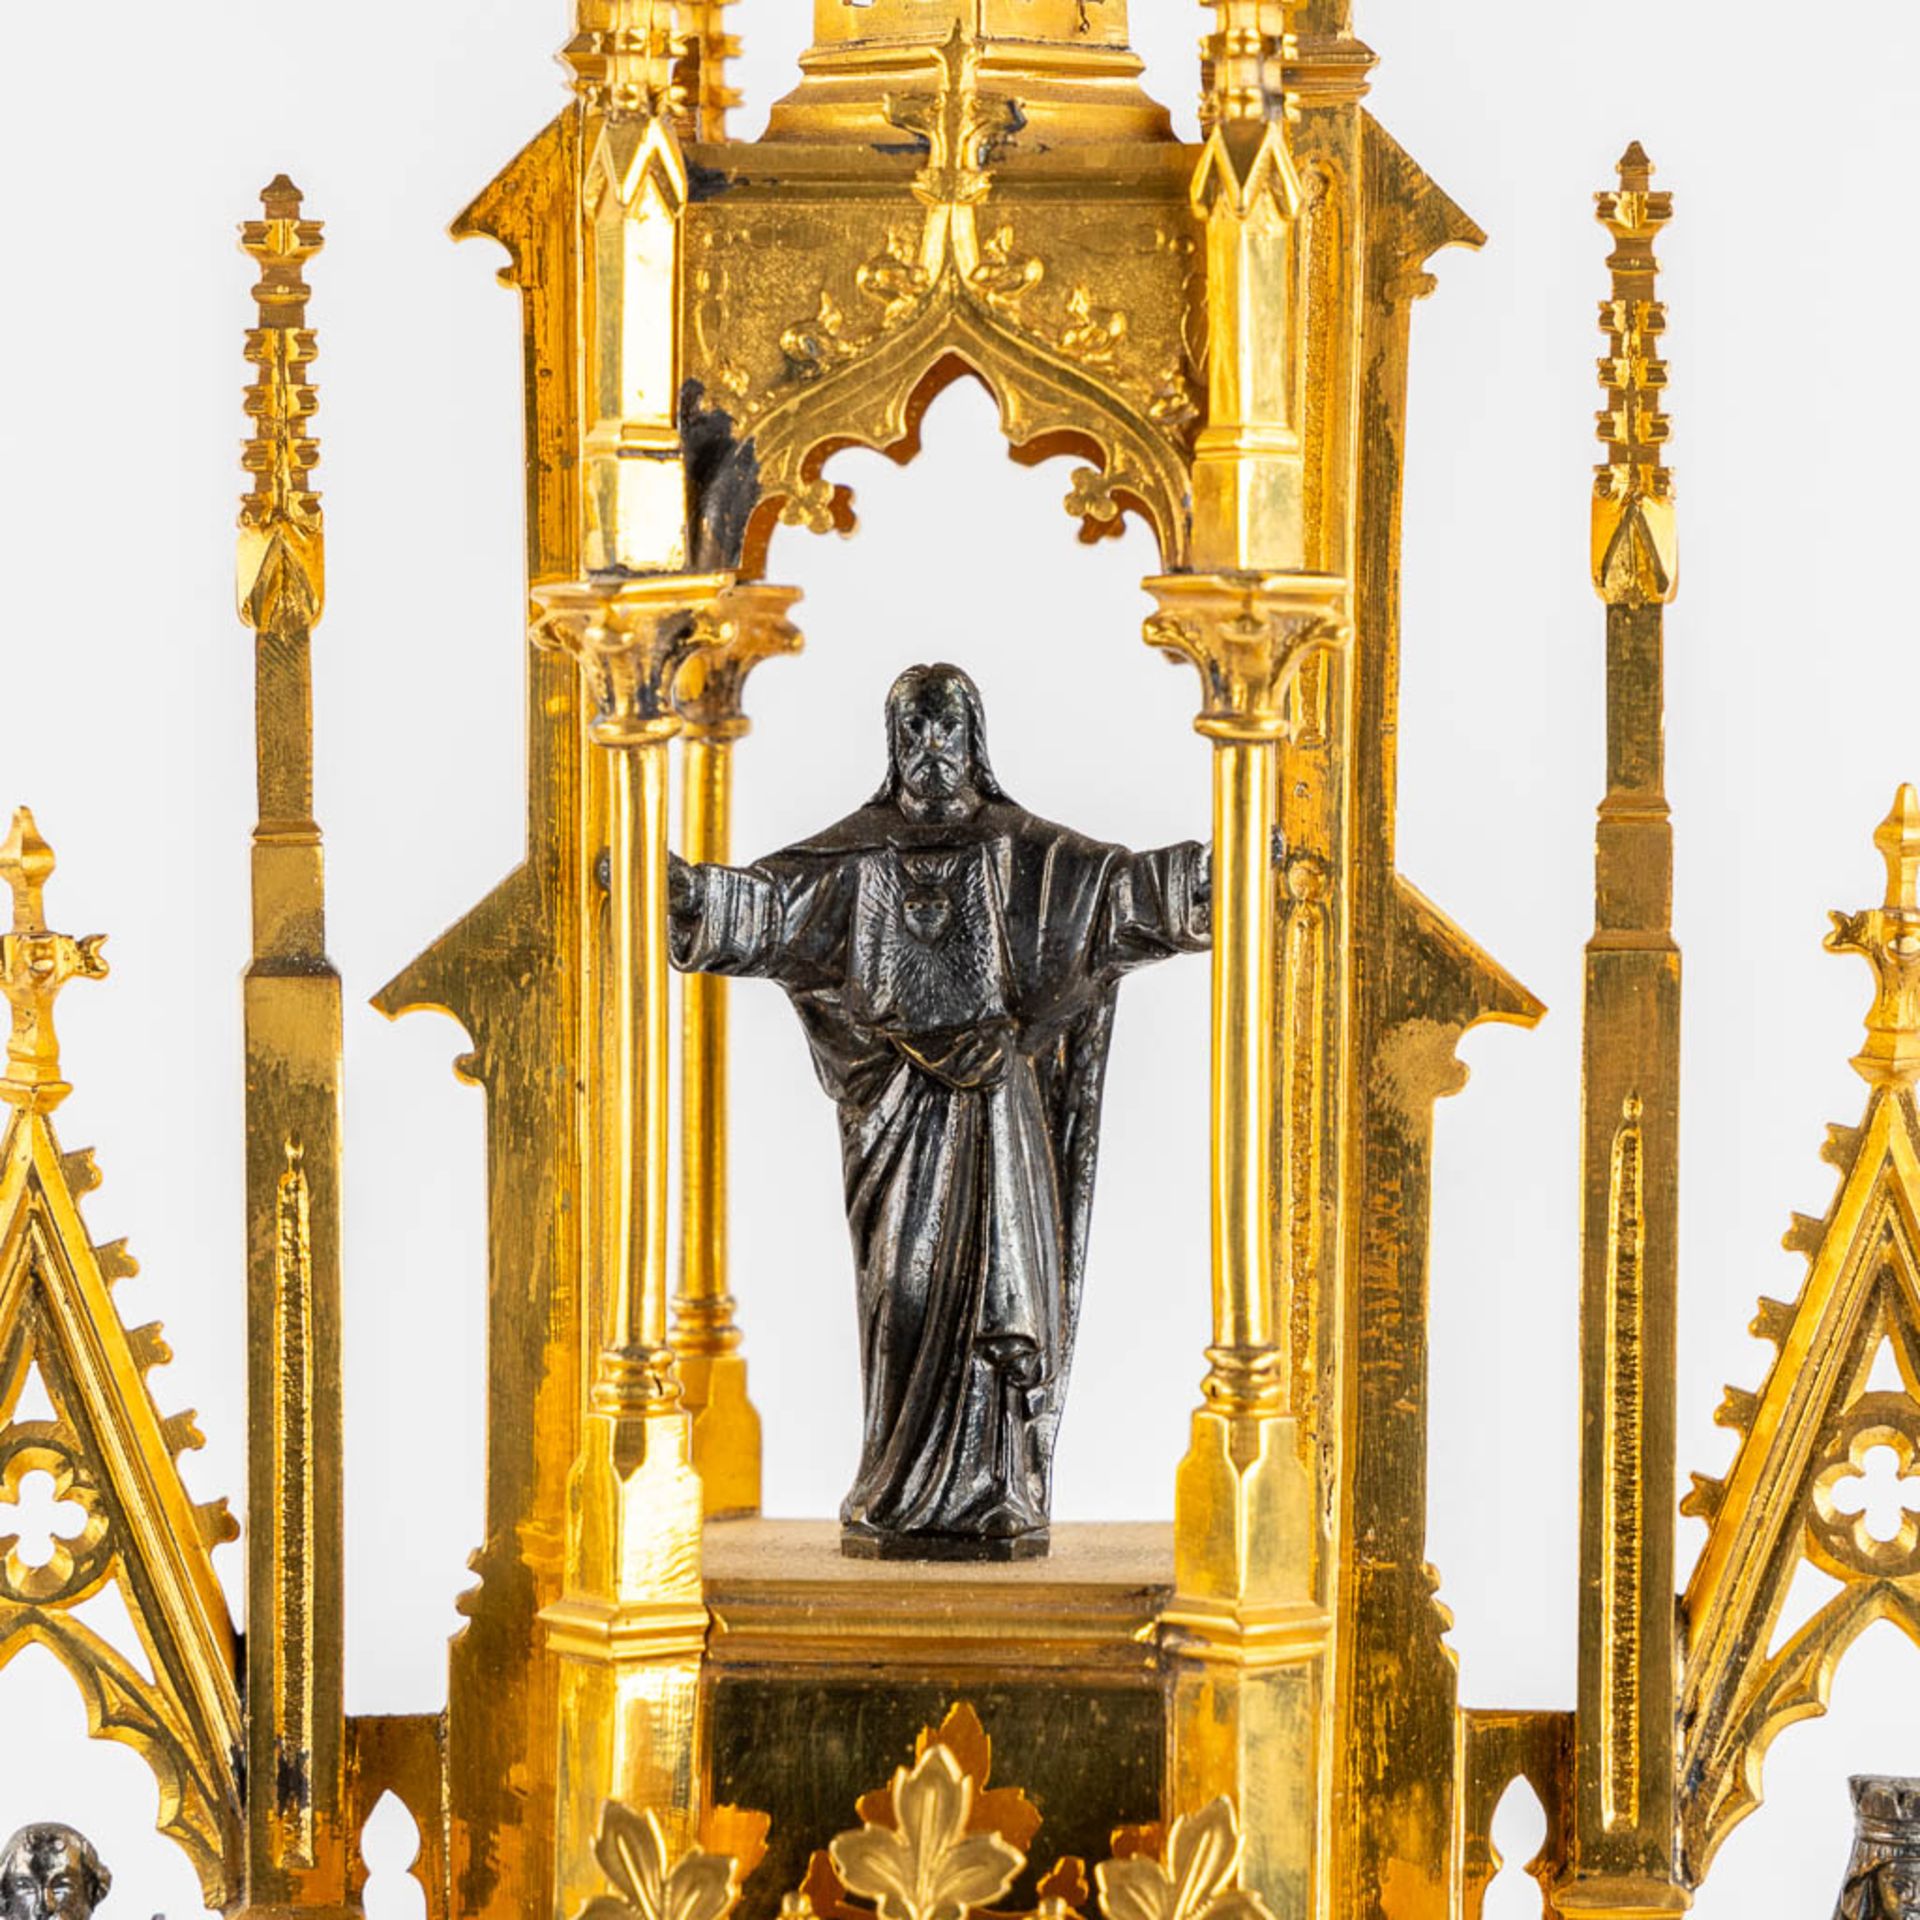 A Tower monstrance, gilt and silver plated brass, Gothic Revival. 19th C. (W:21,5 x H:58 cm) - Bild 13 aus 22